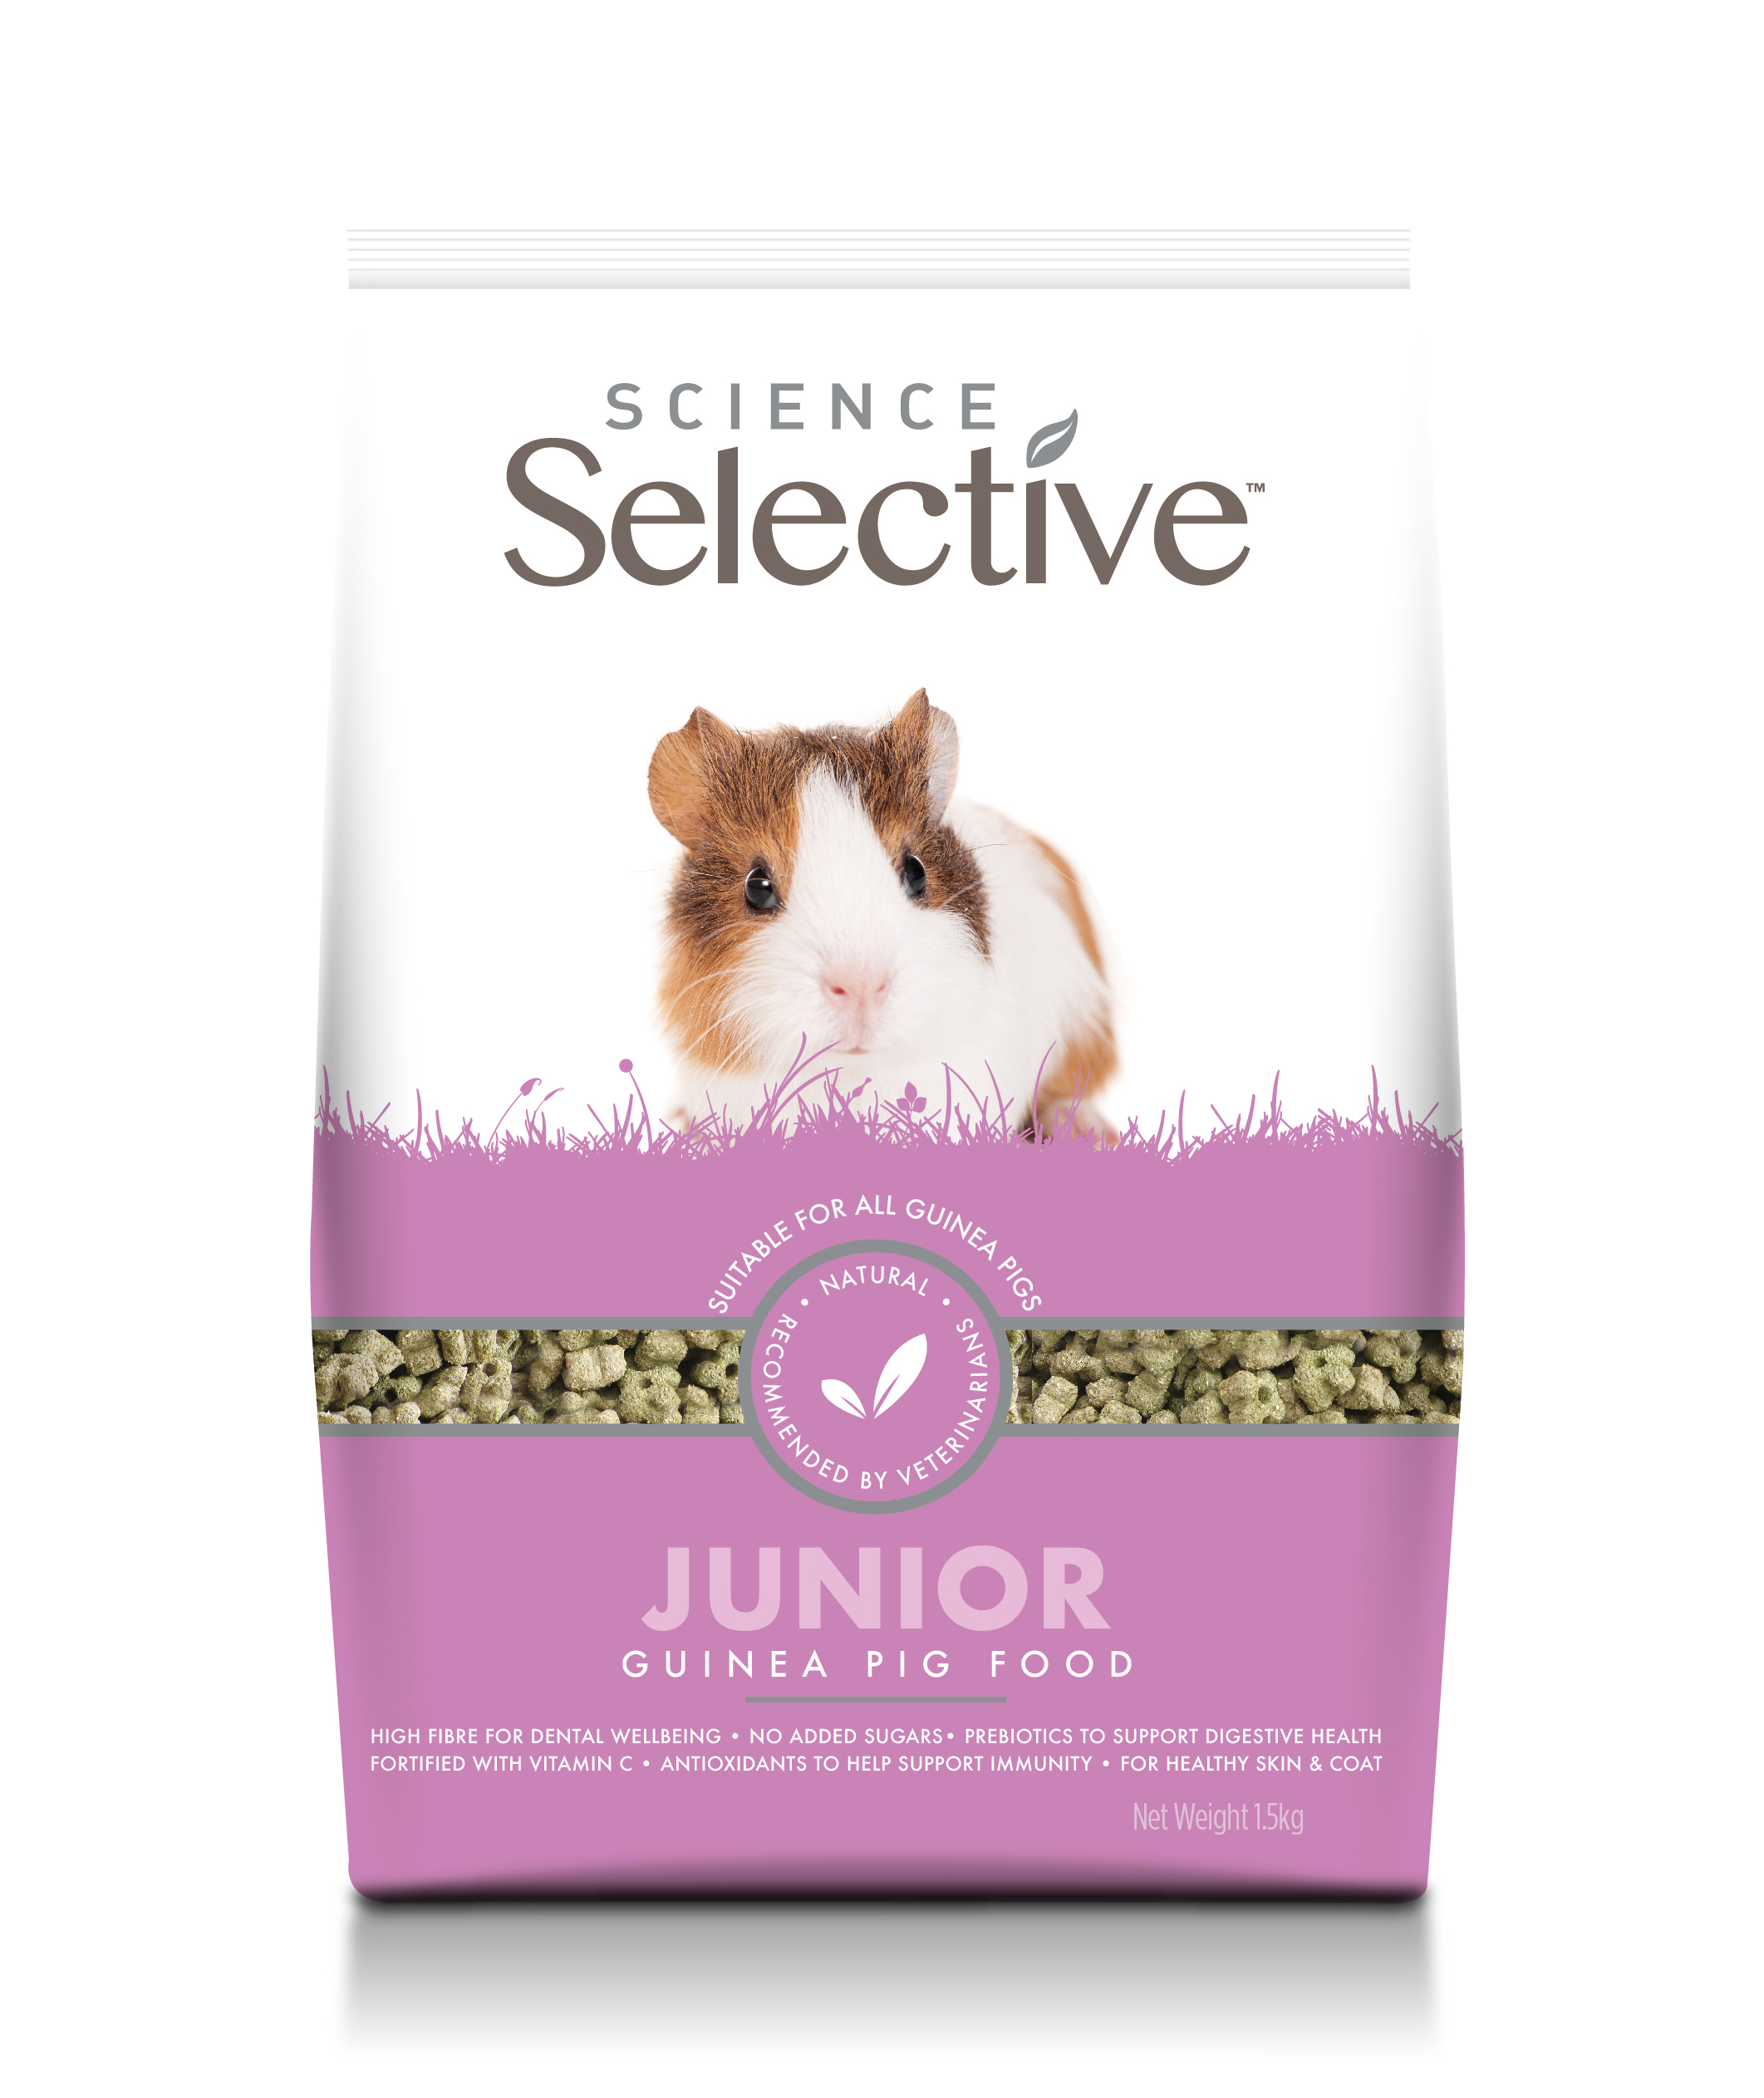 Supreme adds Junior guinea pig food to award-winning Science Selective brand